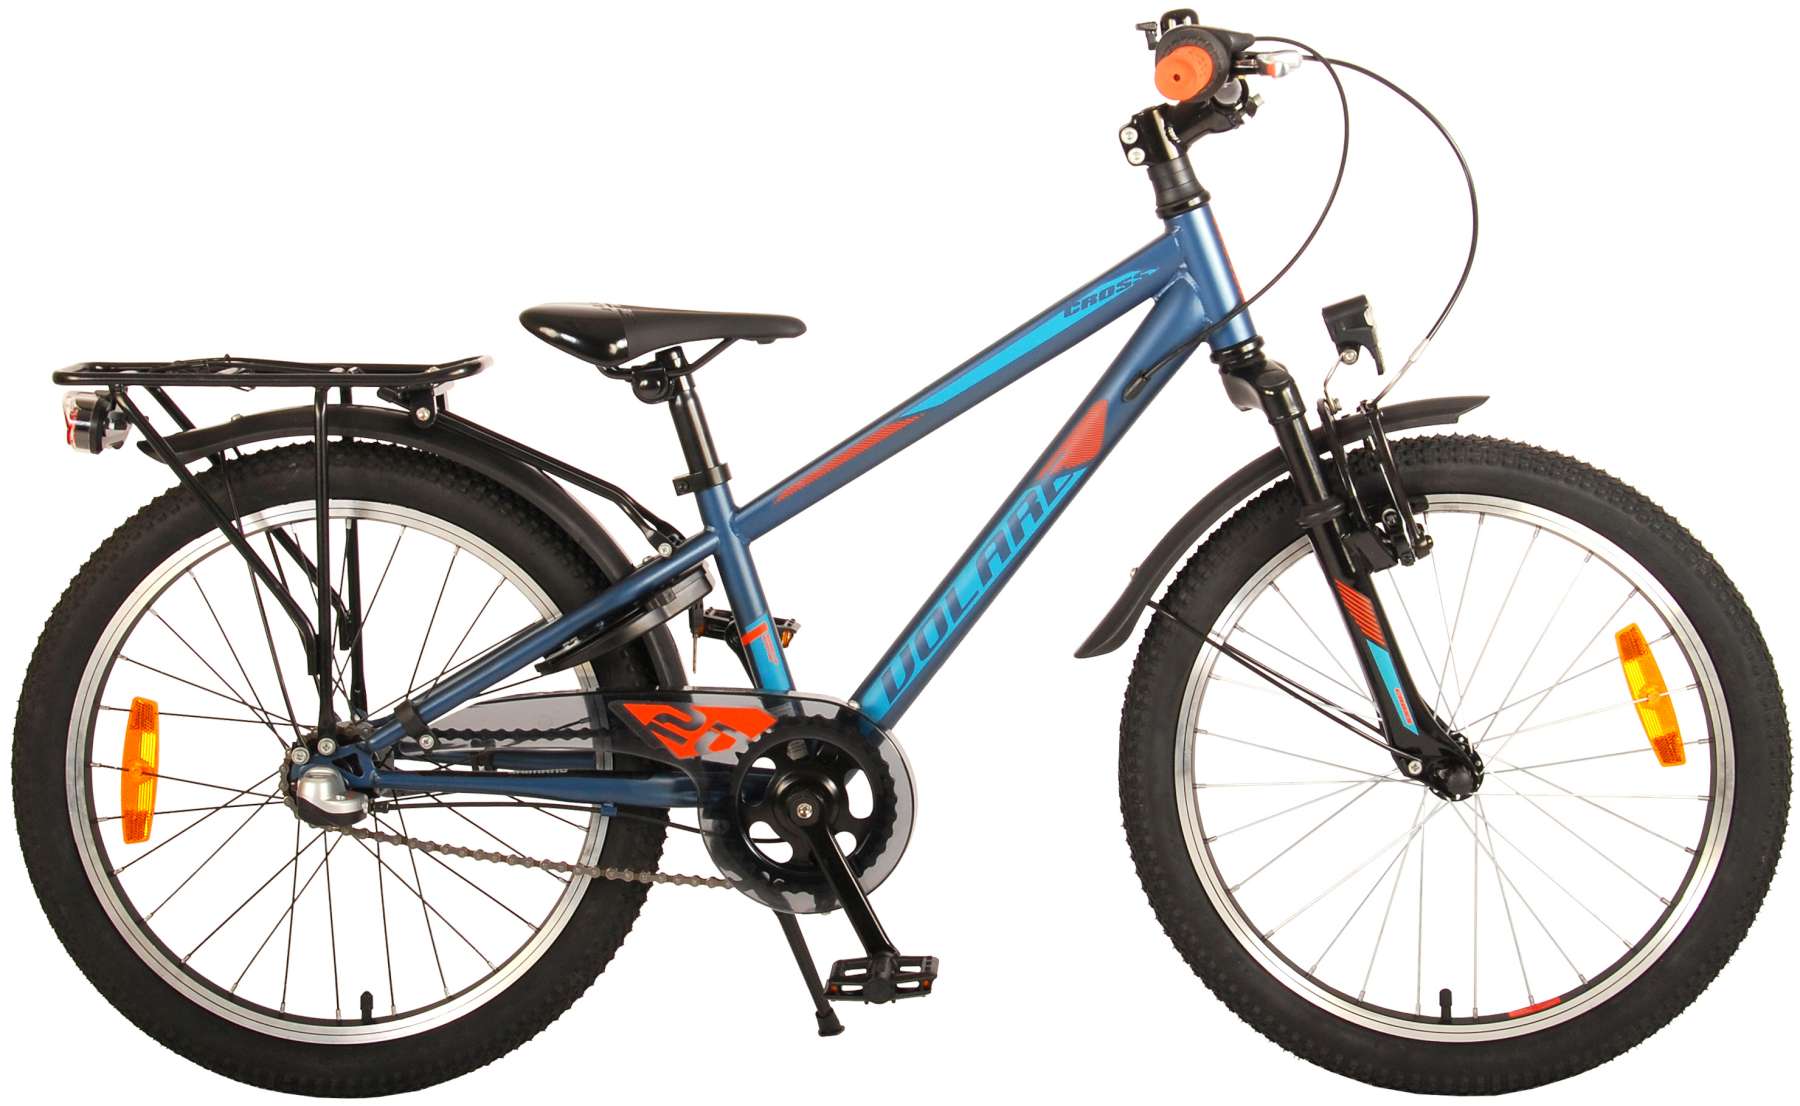 gear bicycle for boys